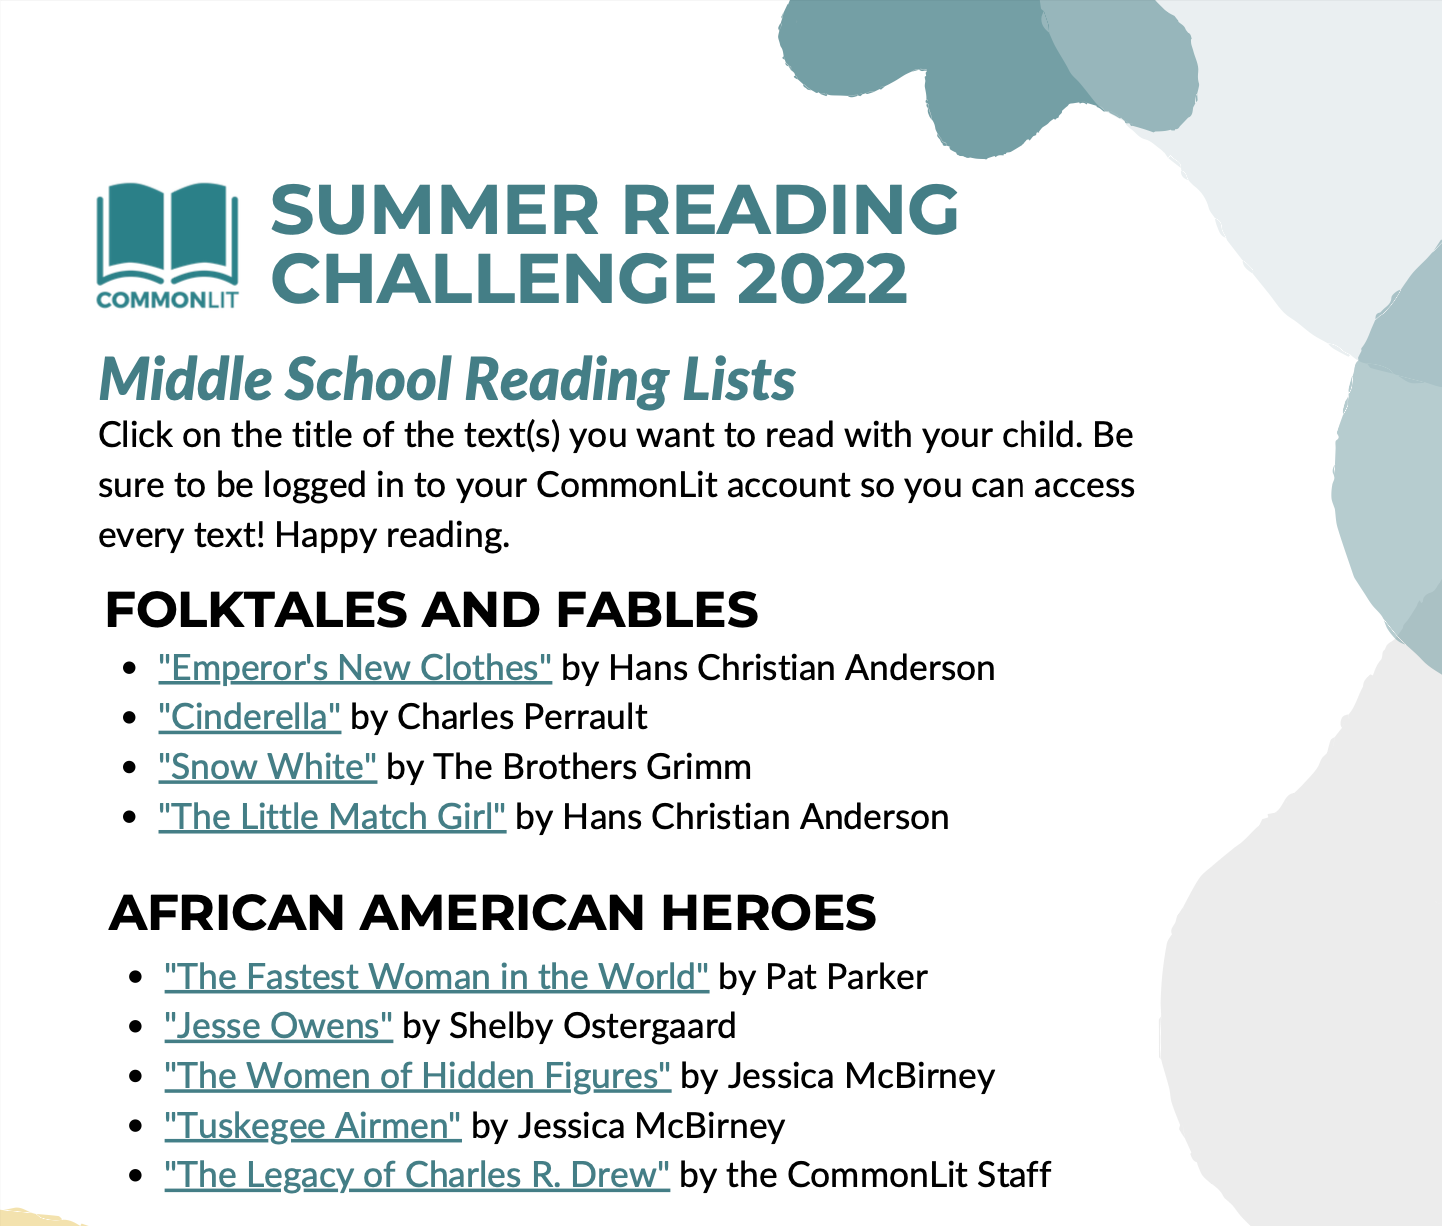 List of Middle School texts for the Summer Reading Challenge